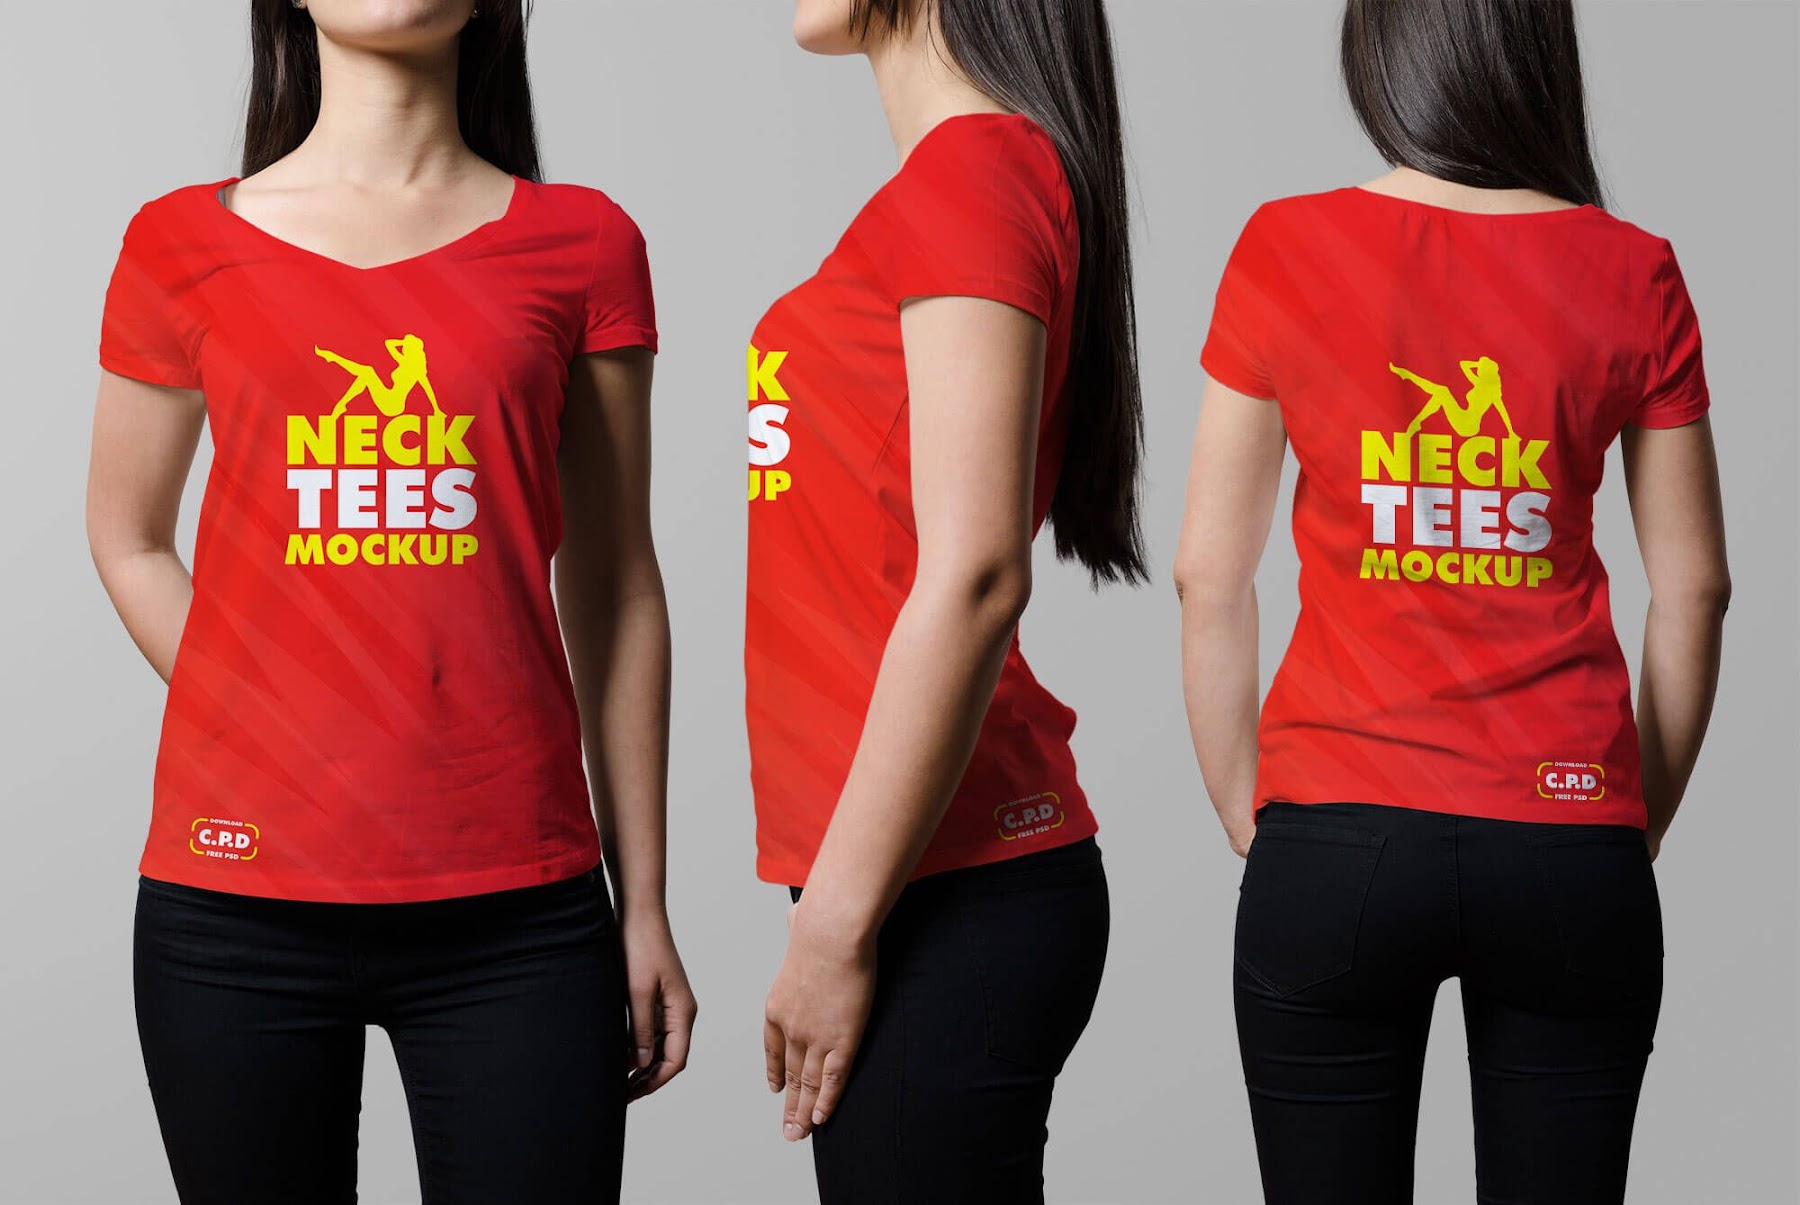 Download Free 3557+ T Shirt Mockup Generator Online Yellowimages Mockups free packaging mockups from the trusted websites.